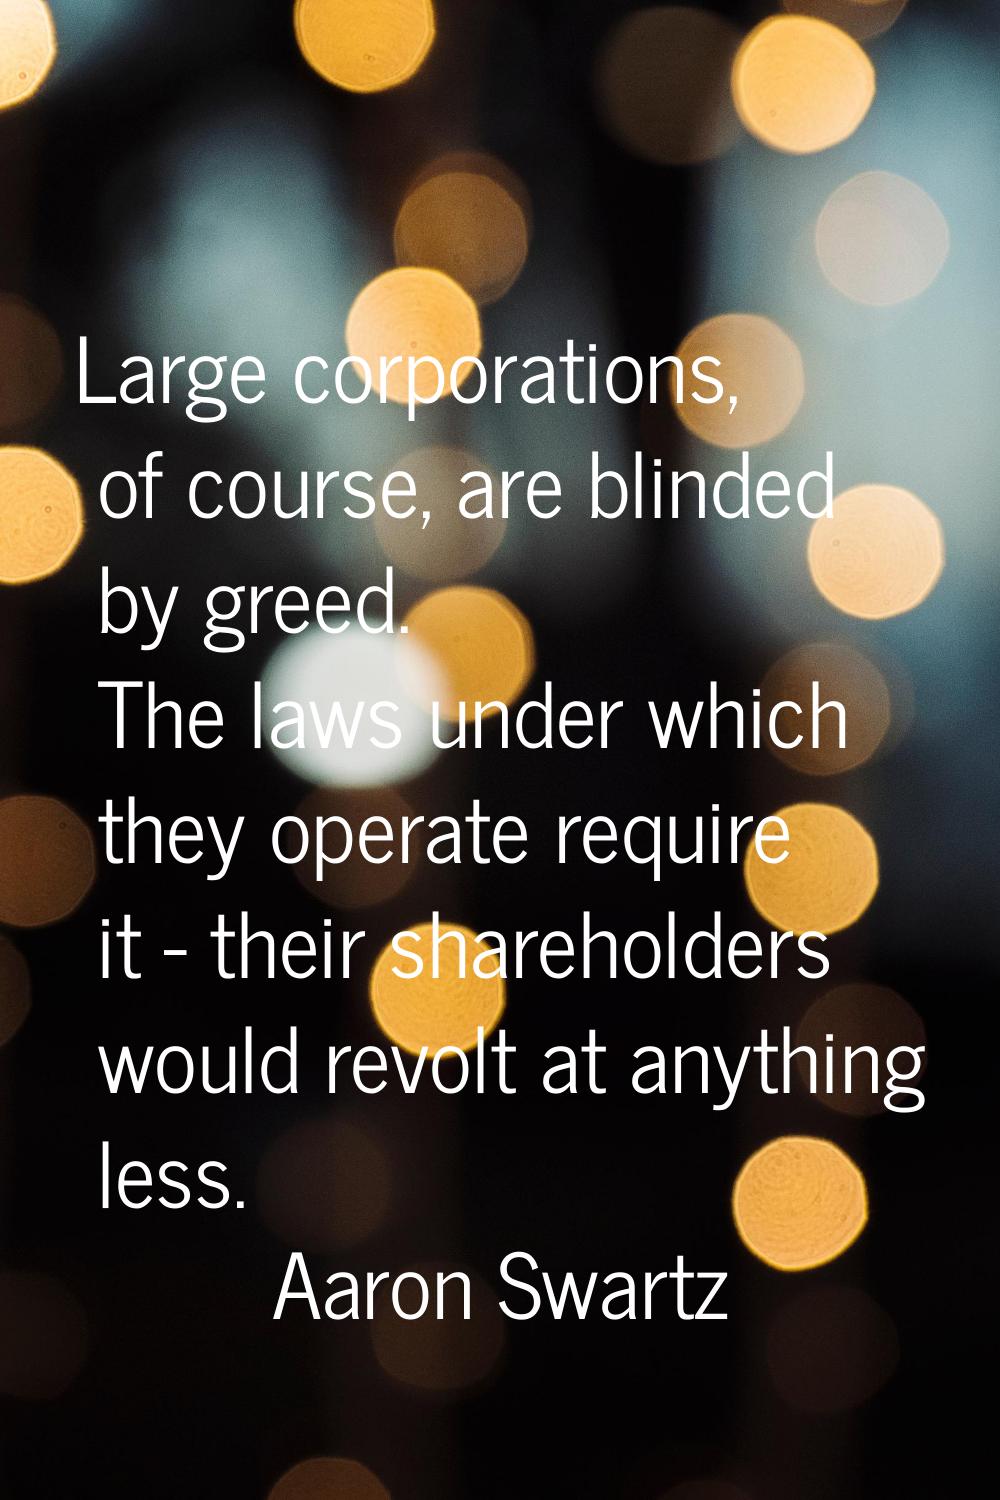 Large corporations, of course, are blinded by greed. The laws under which they operate require it -